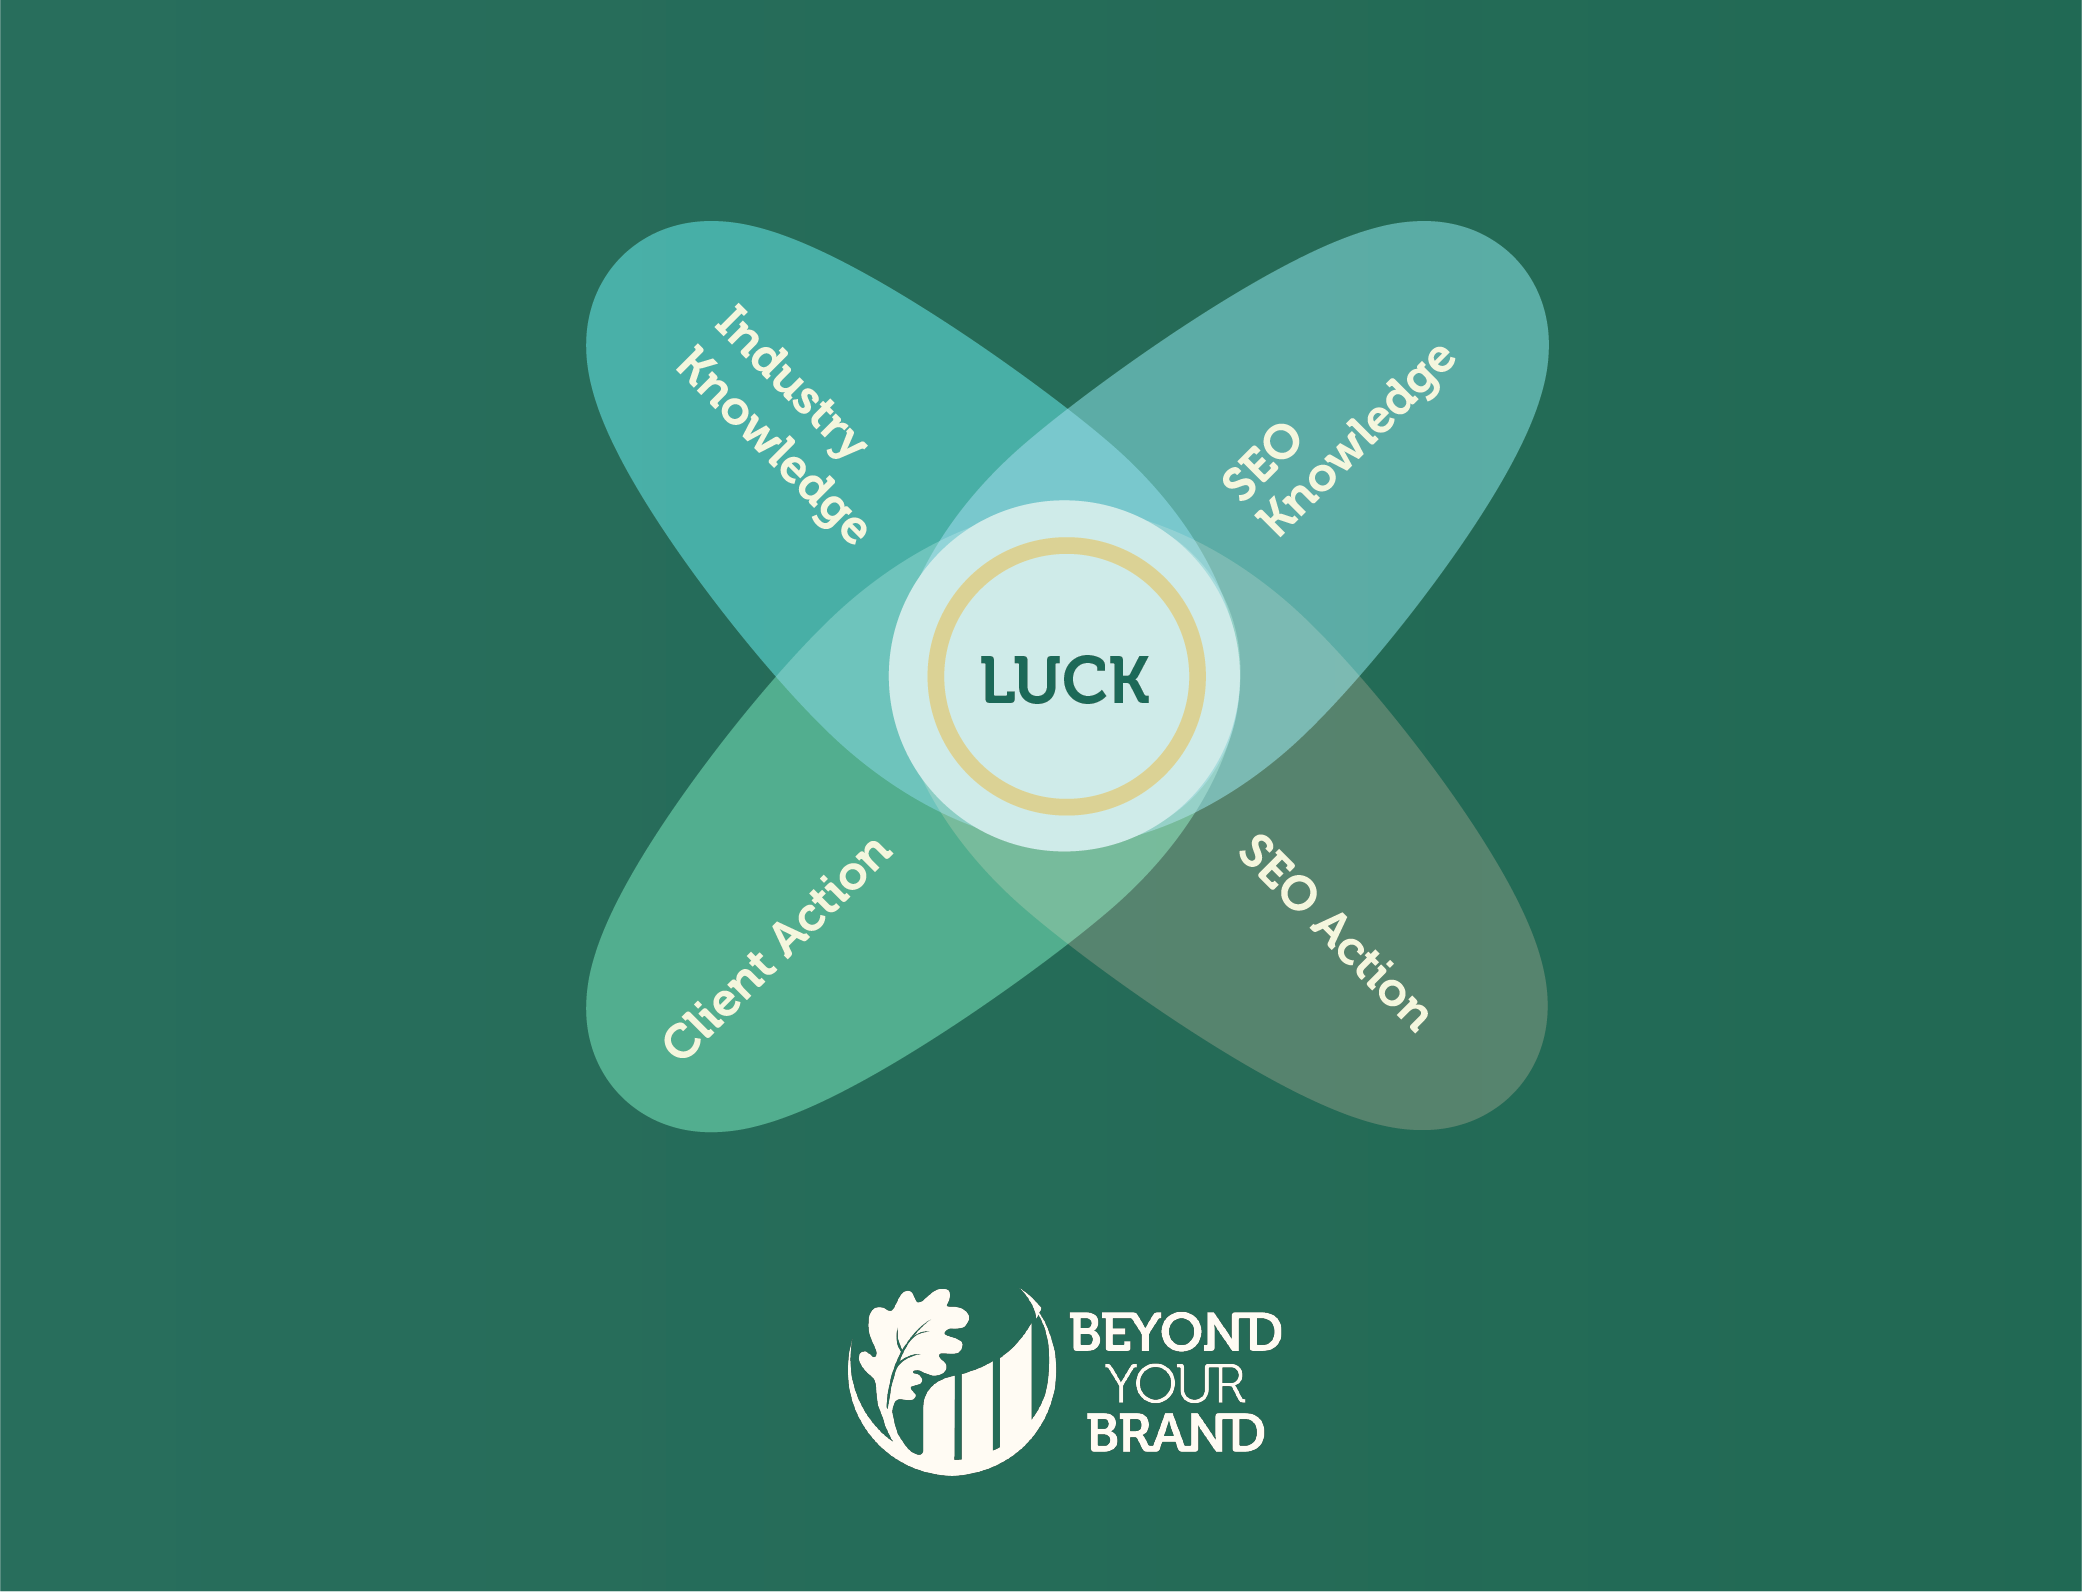 A repetition of the above venn diagram consisting of four ovals and a central circle, but within that there is also another smaller circle for "Luck"